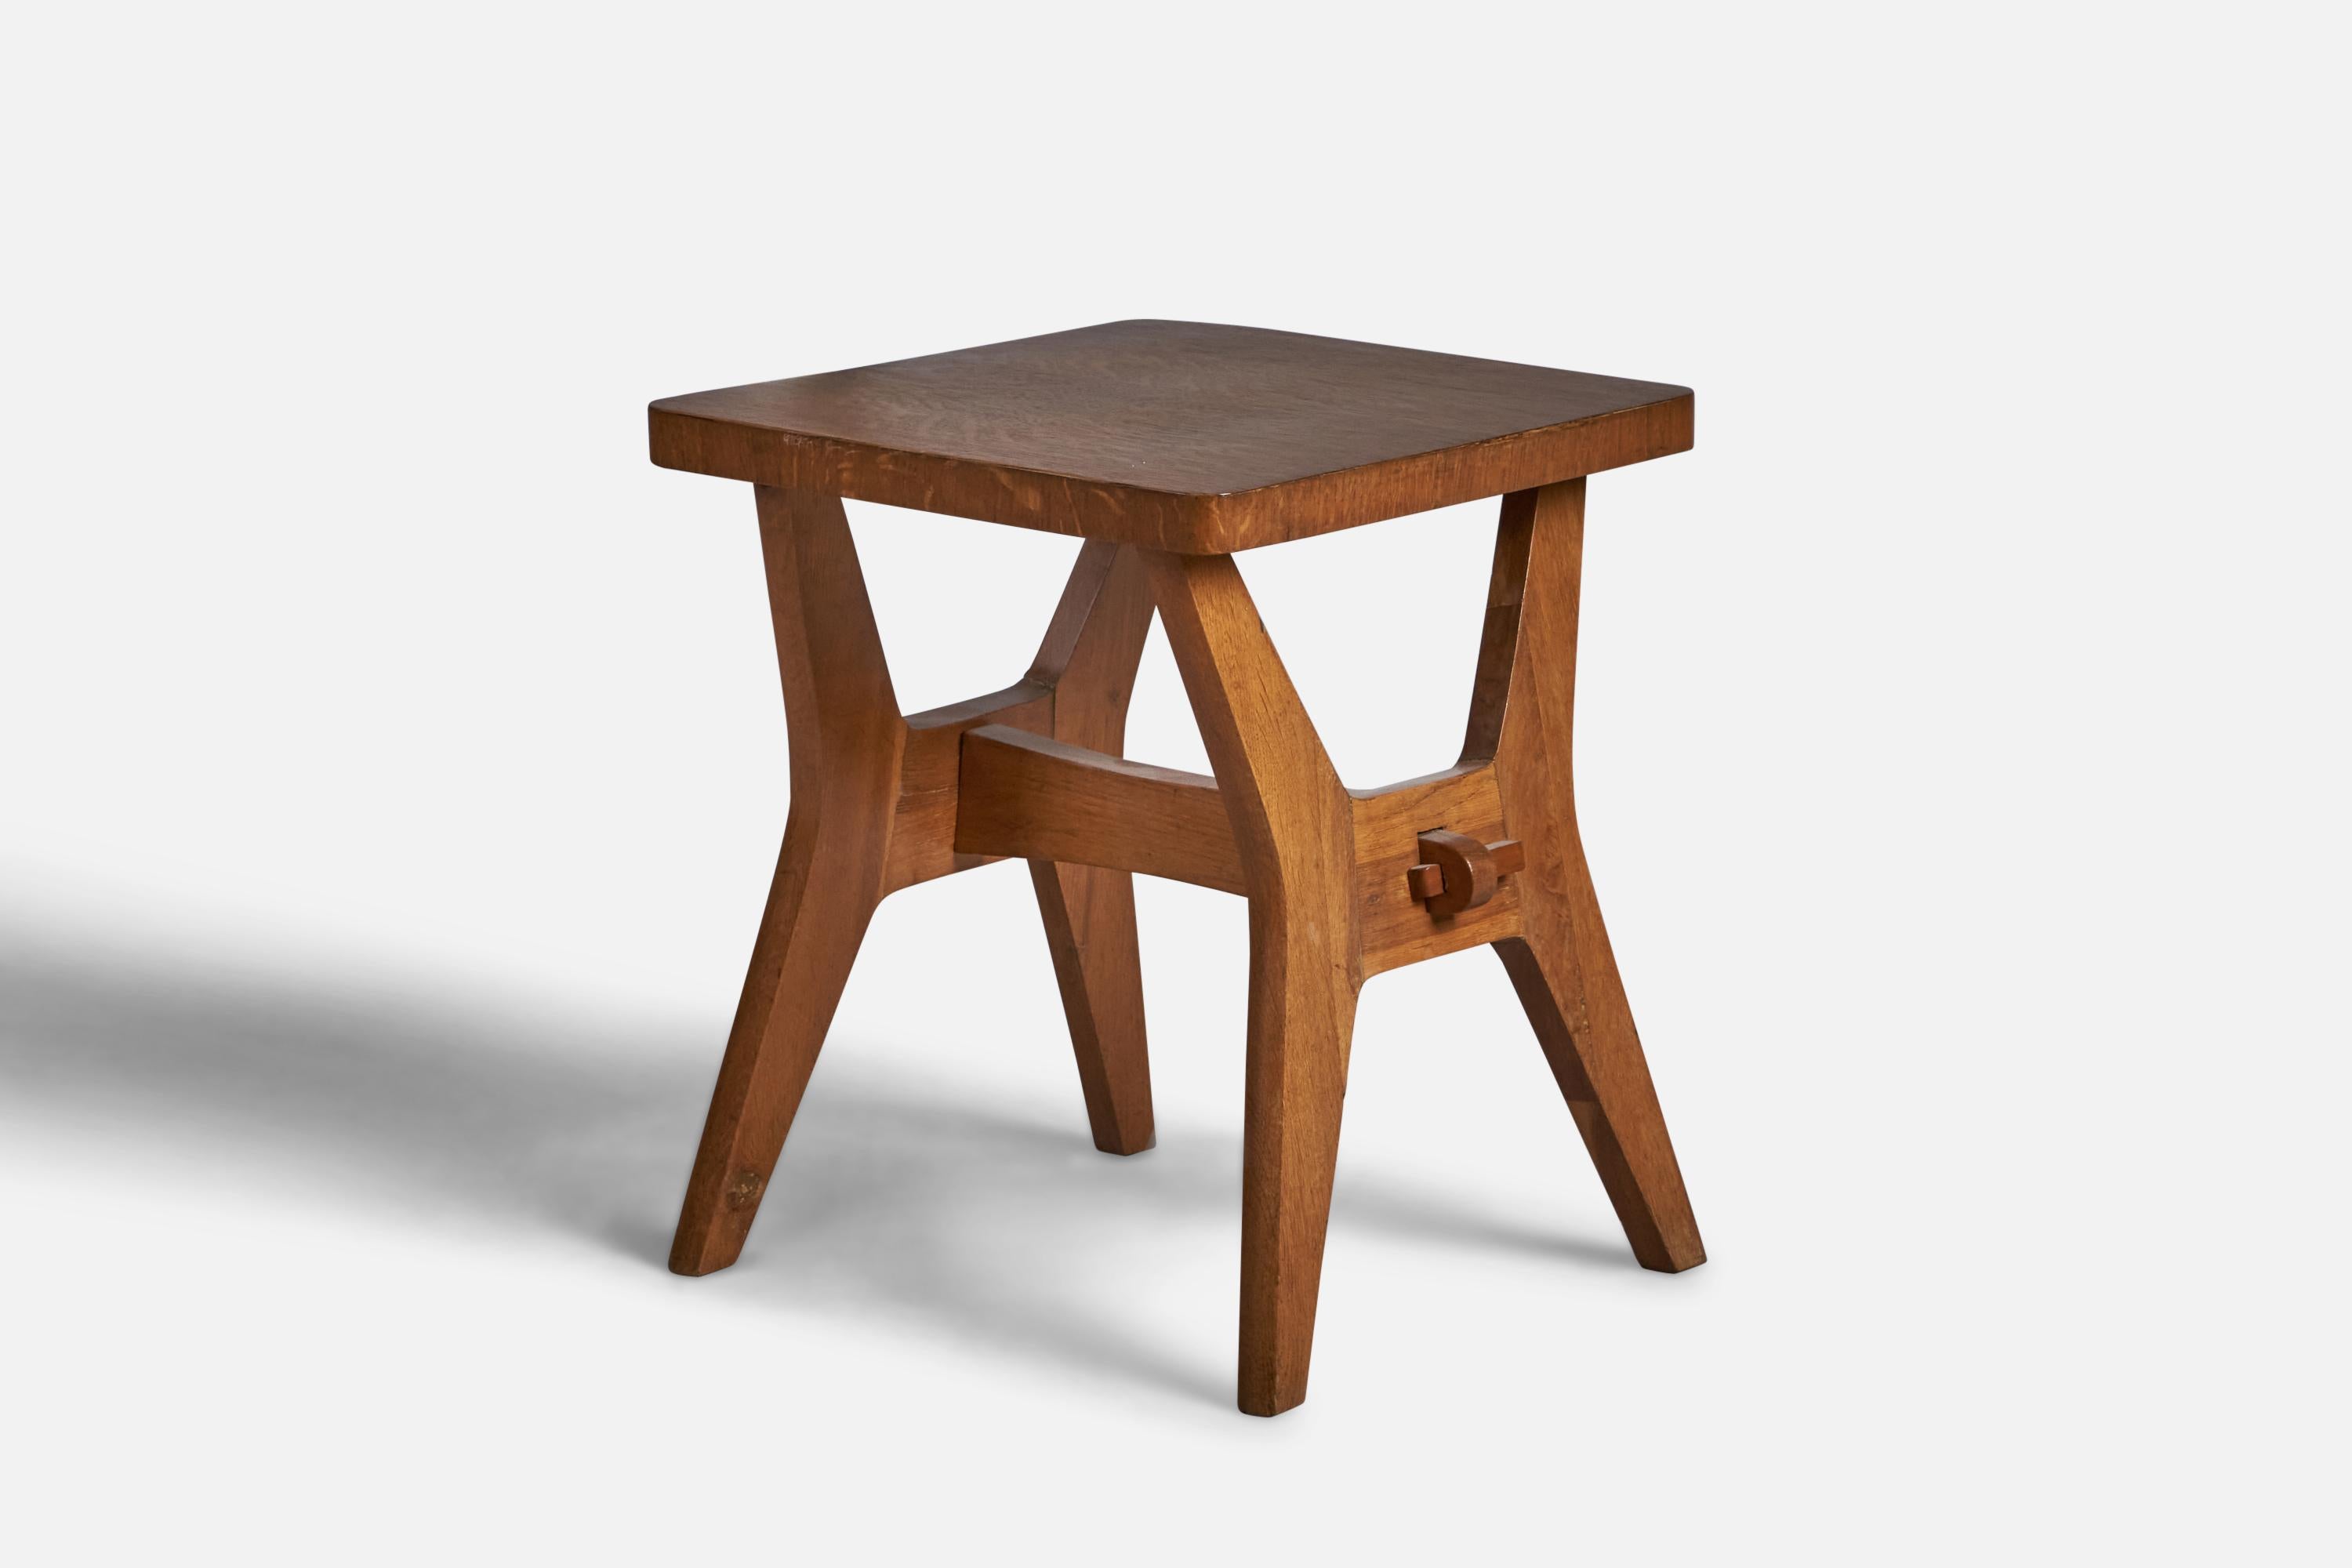 An oak side table or stool designed and produced in Italy, 1940s.